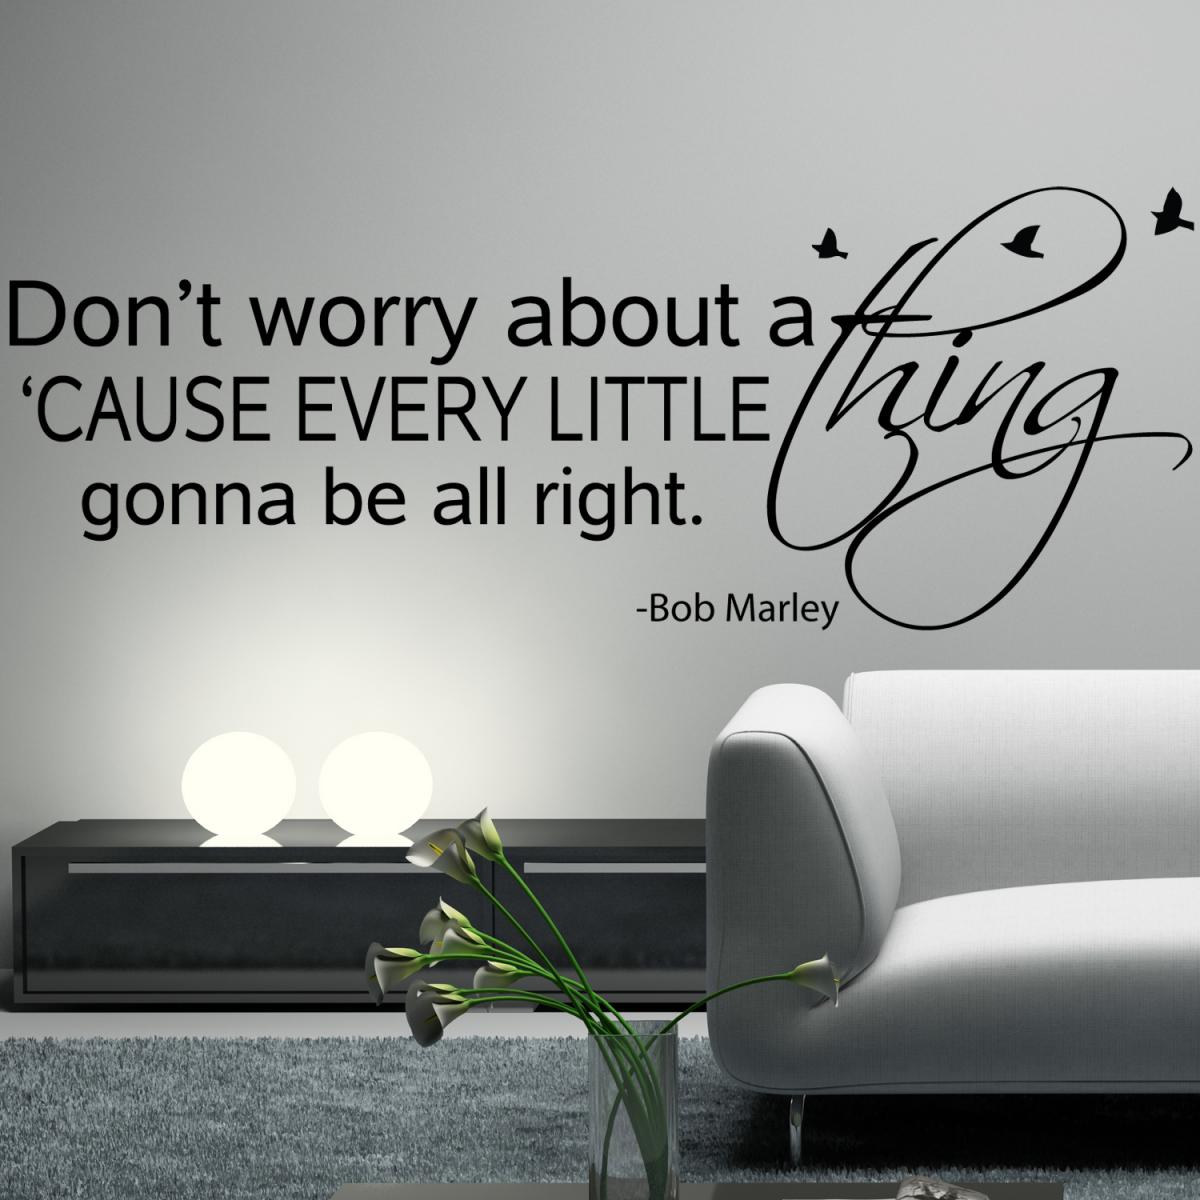 Bob Marley Wall Decal Sticker Art Vinyl Quote Don't Worry About A Thing, Every Little Thing Is Gonna Be Alright With Birds